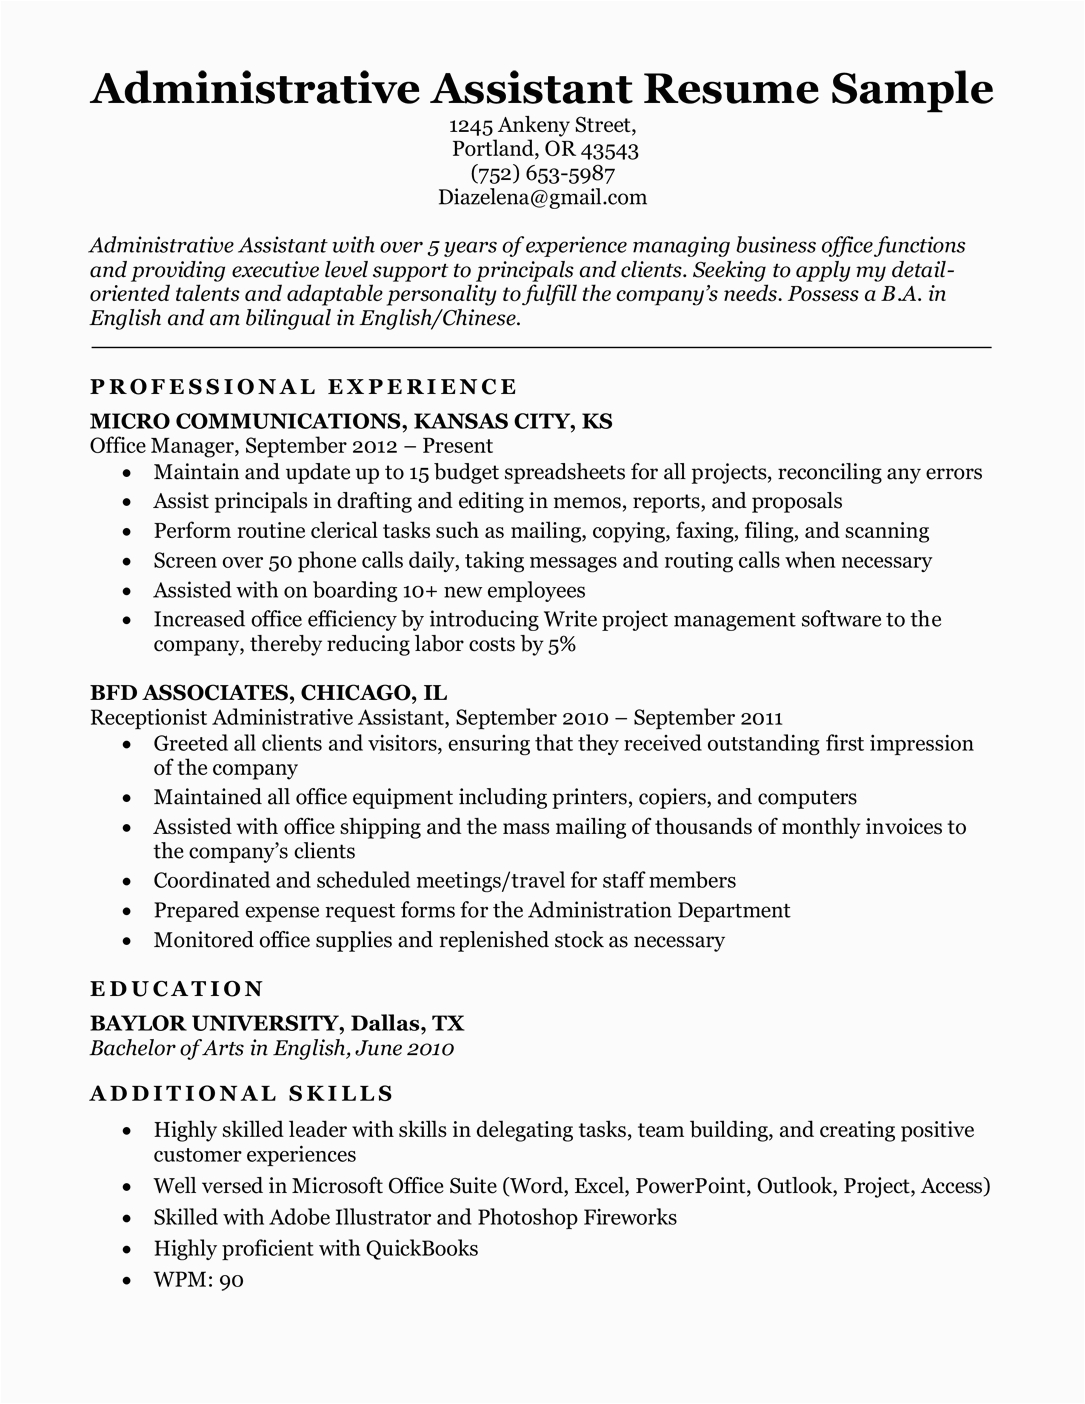 Sample Resume for Career Change to Administrative assistant Admin assistant Resume Template